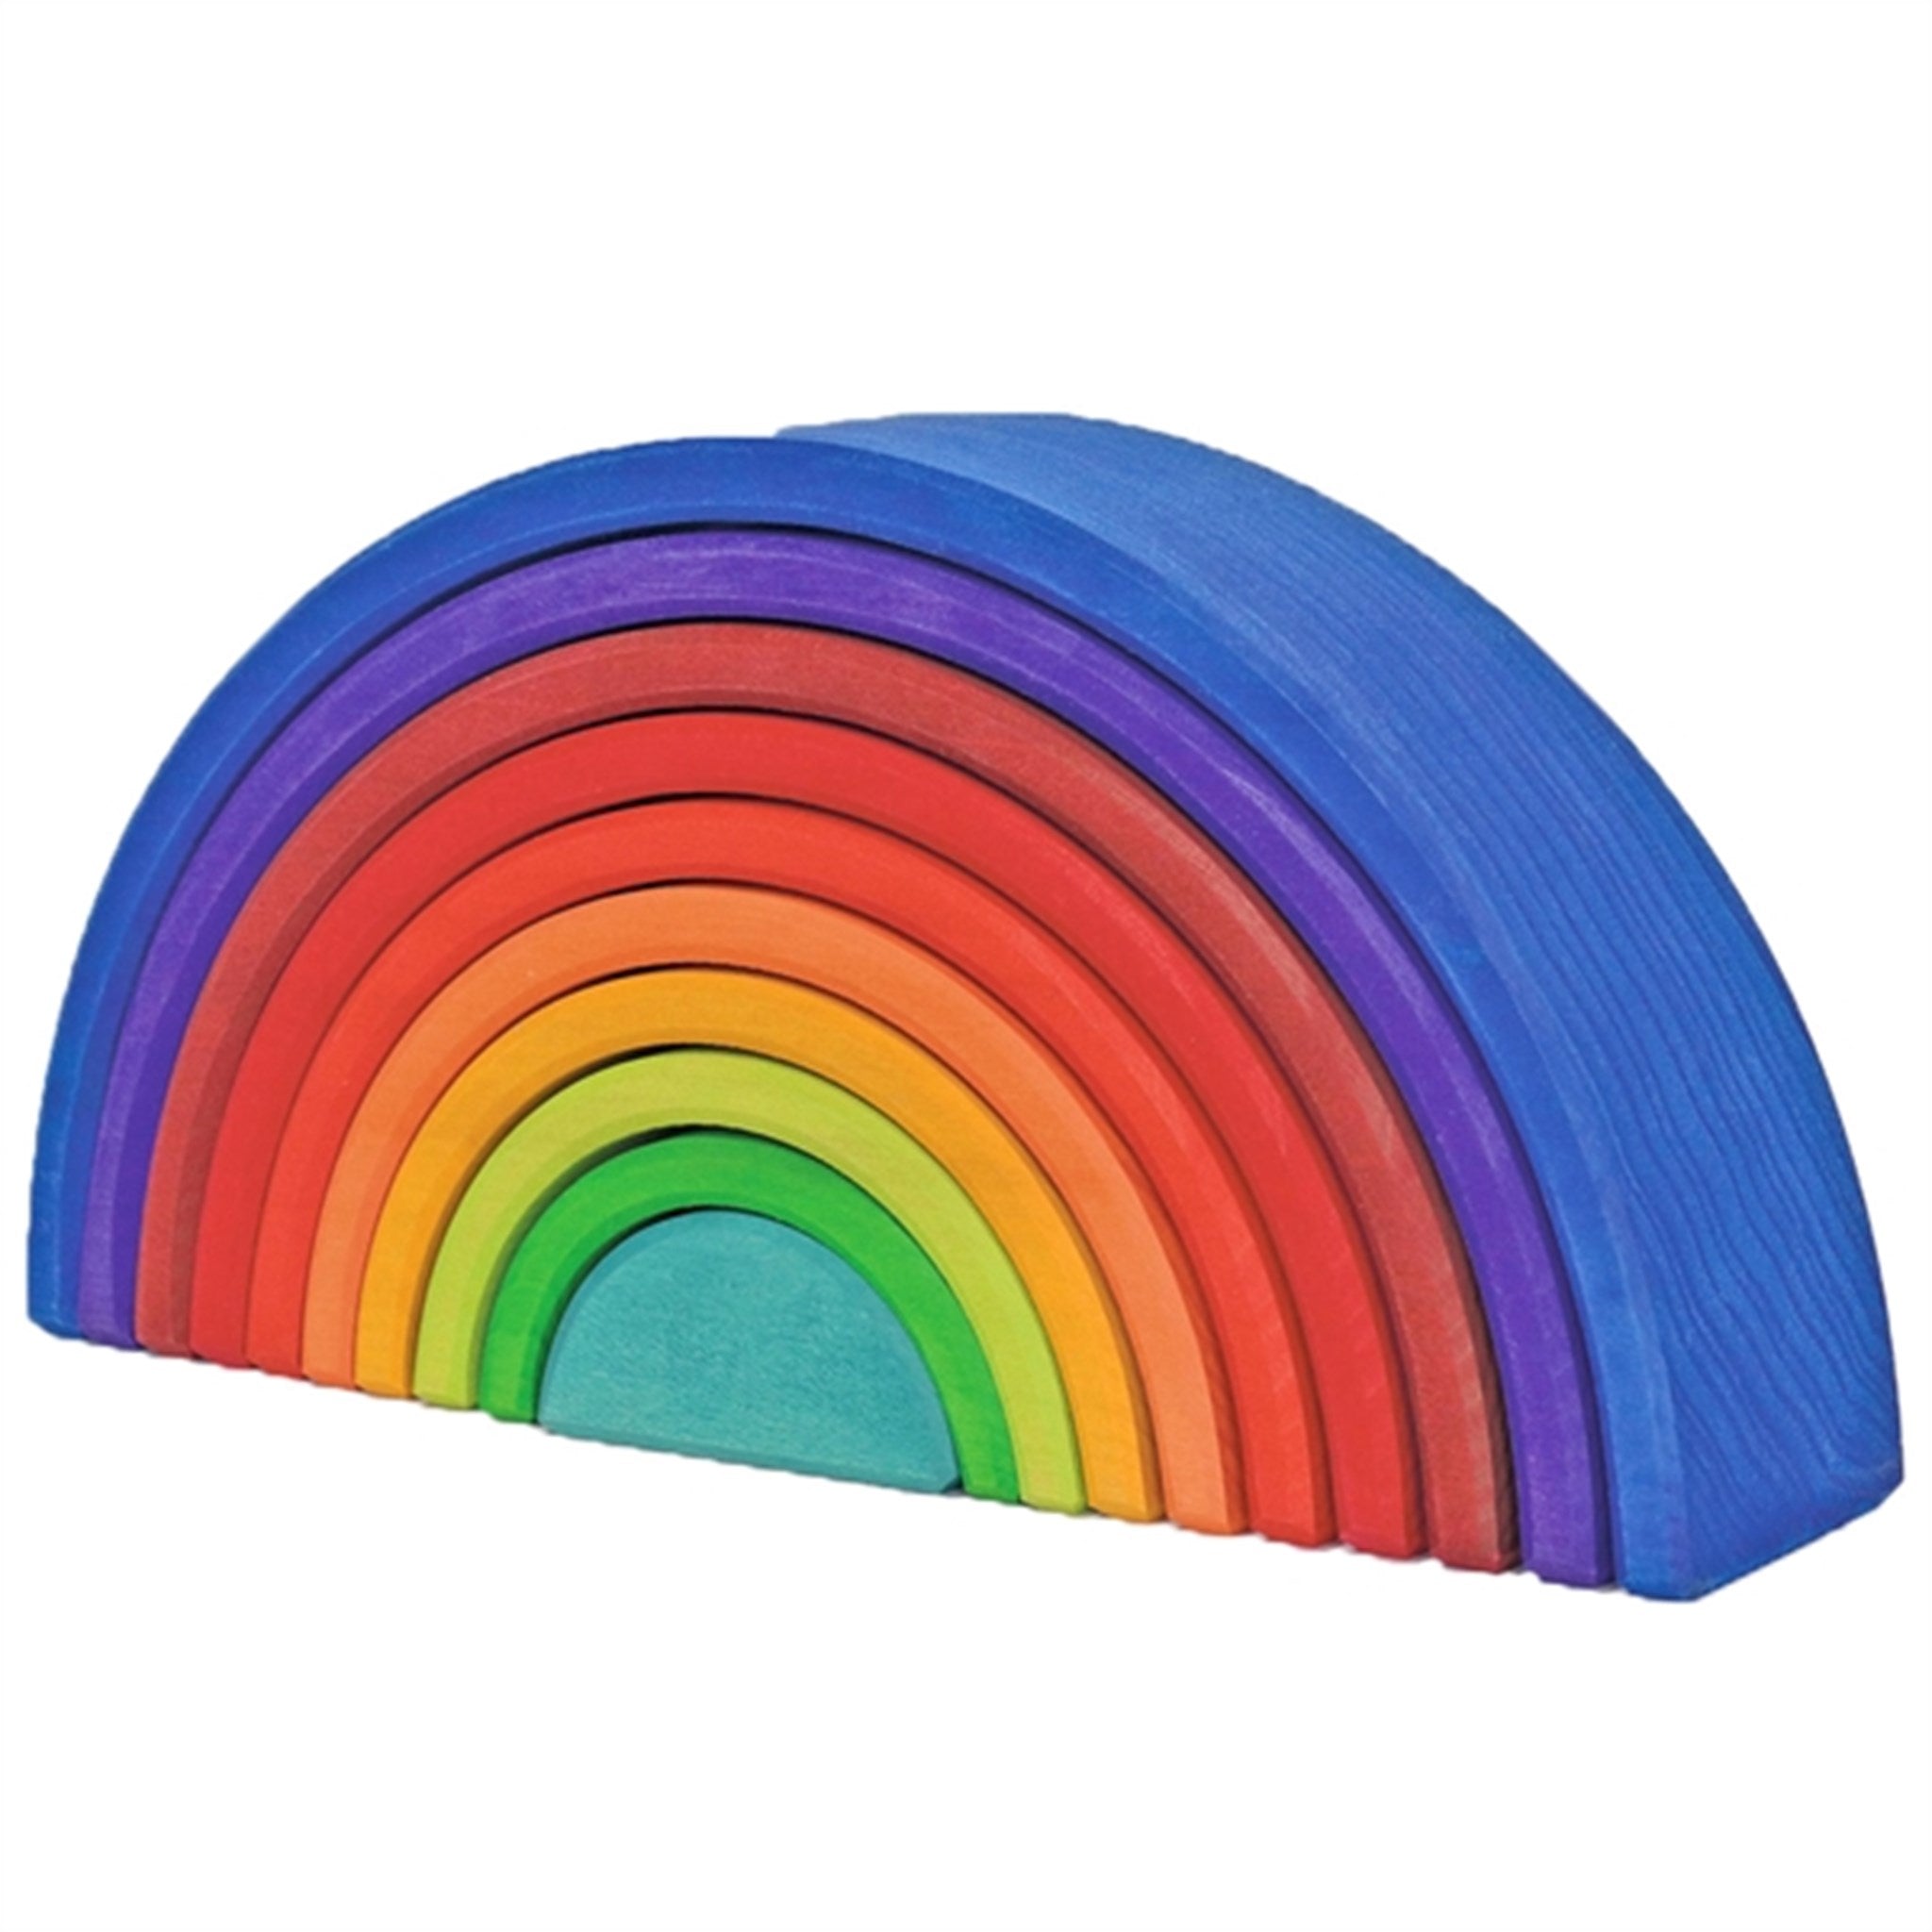 GRIMM´S Rainbow Counting Game